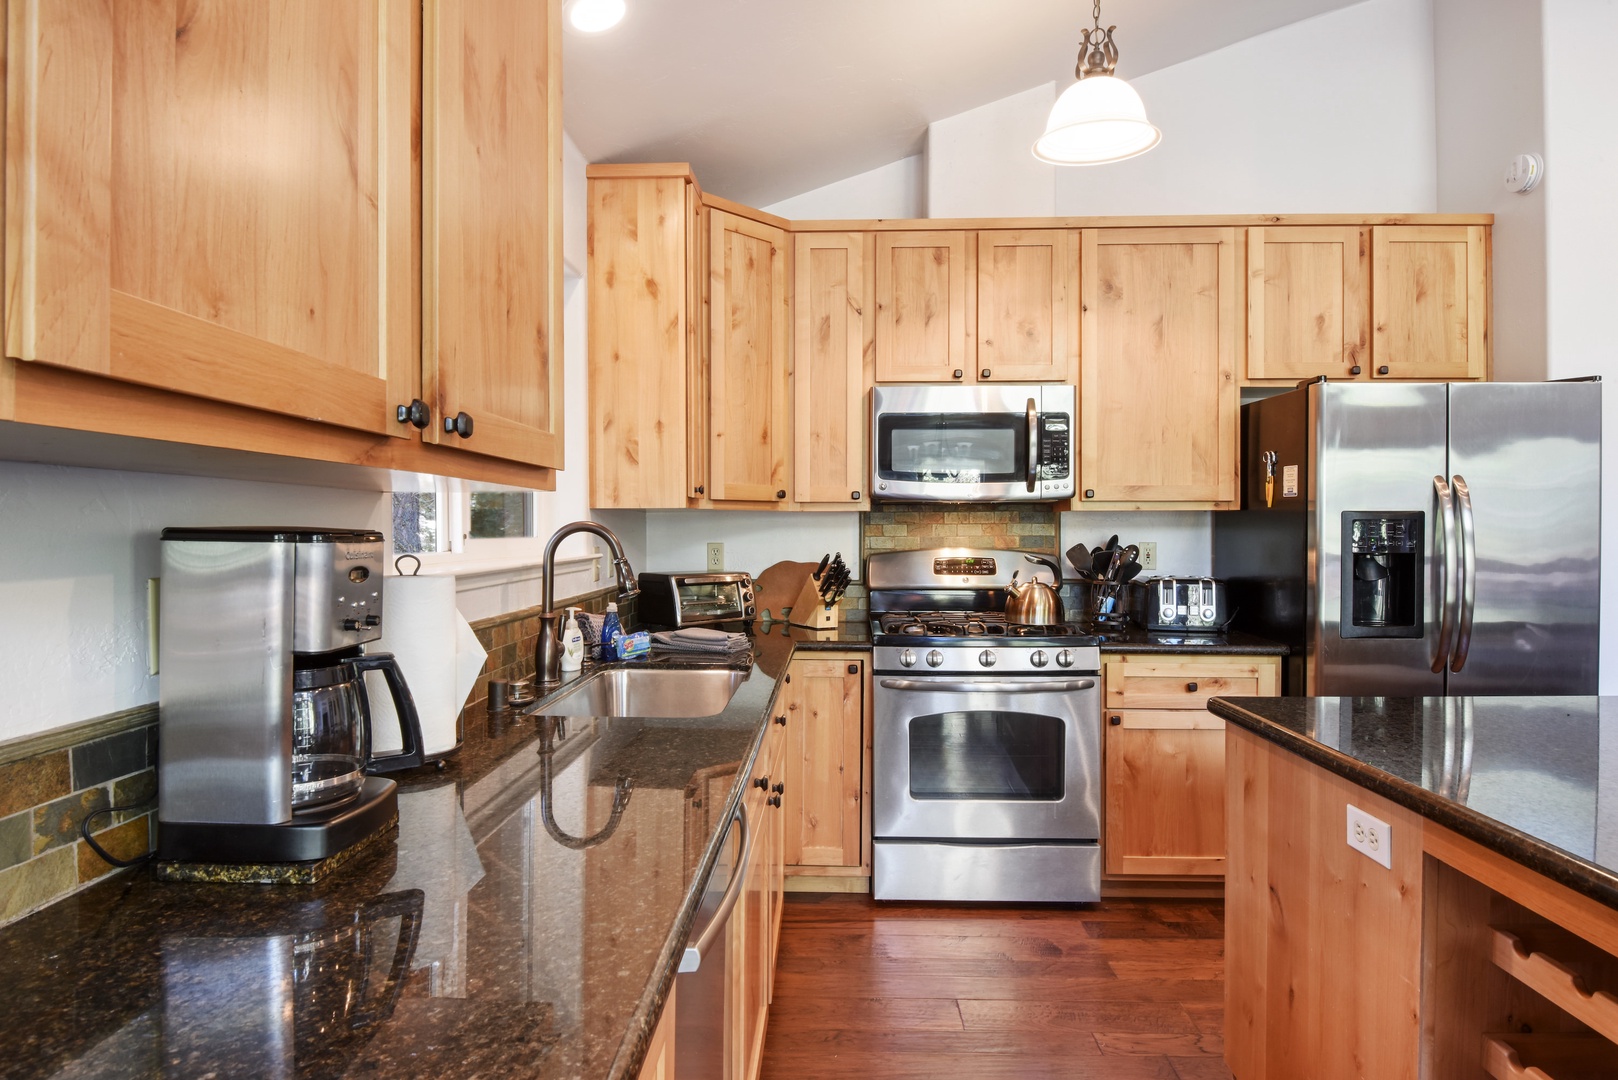 Kitchen with drip coffee maker, toaster oven, blender, and more